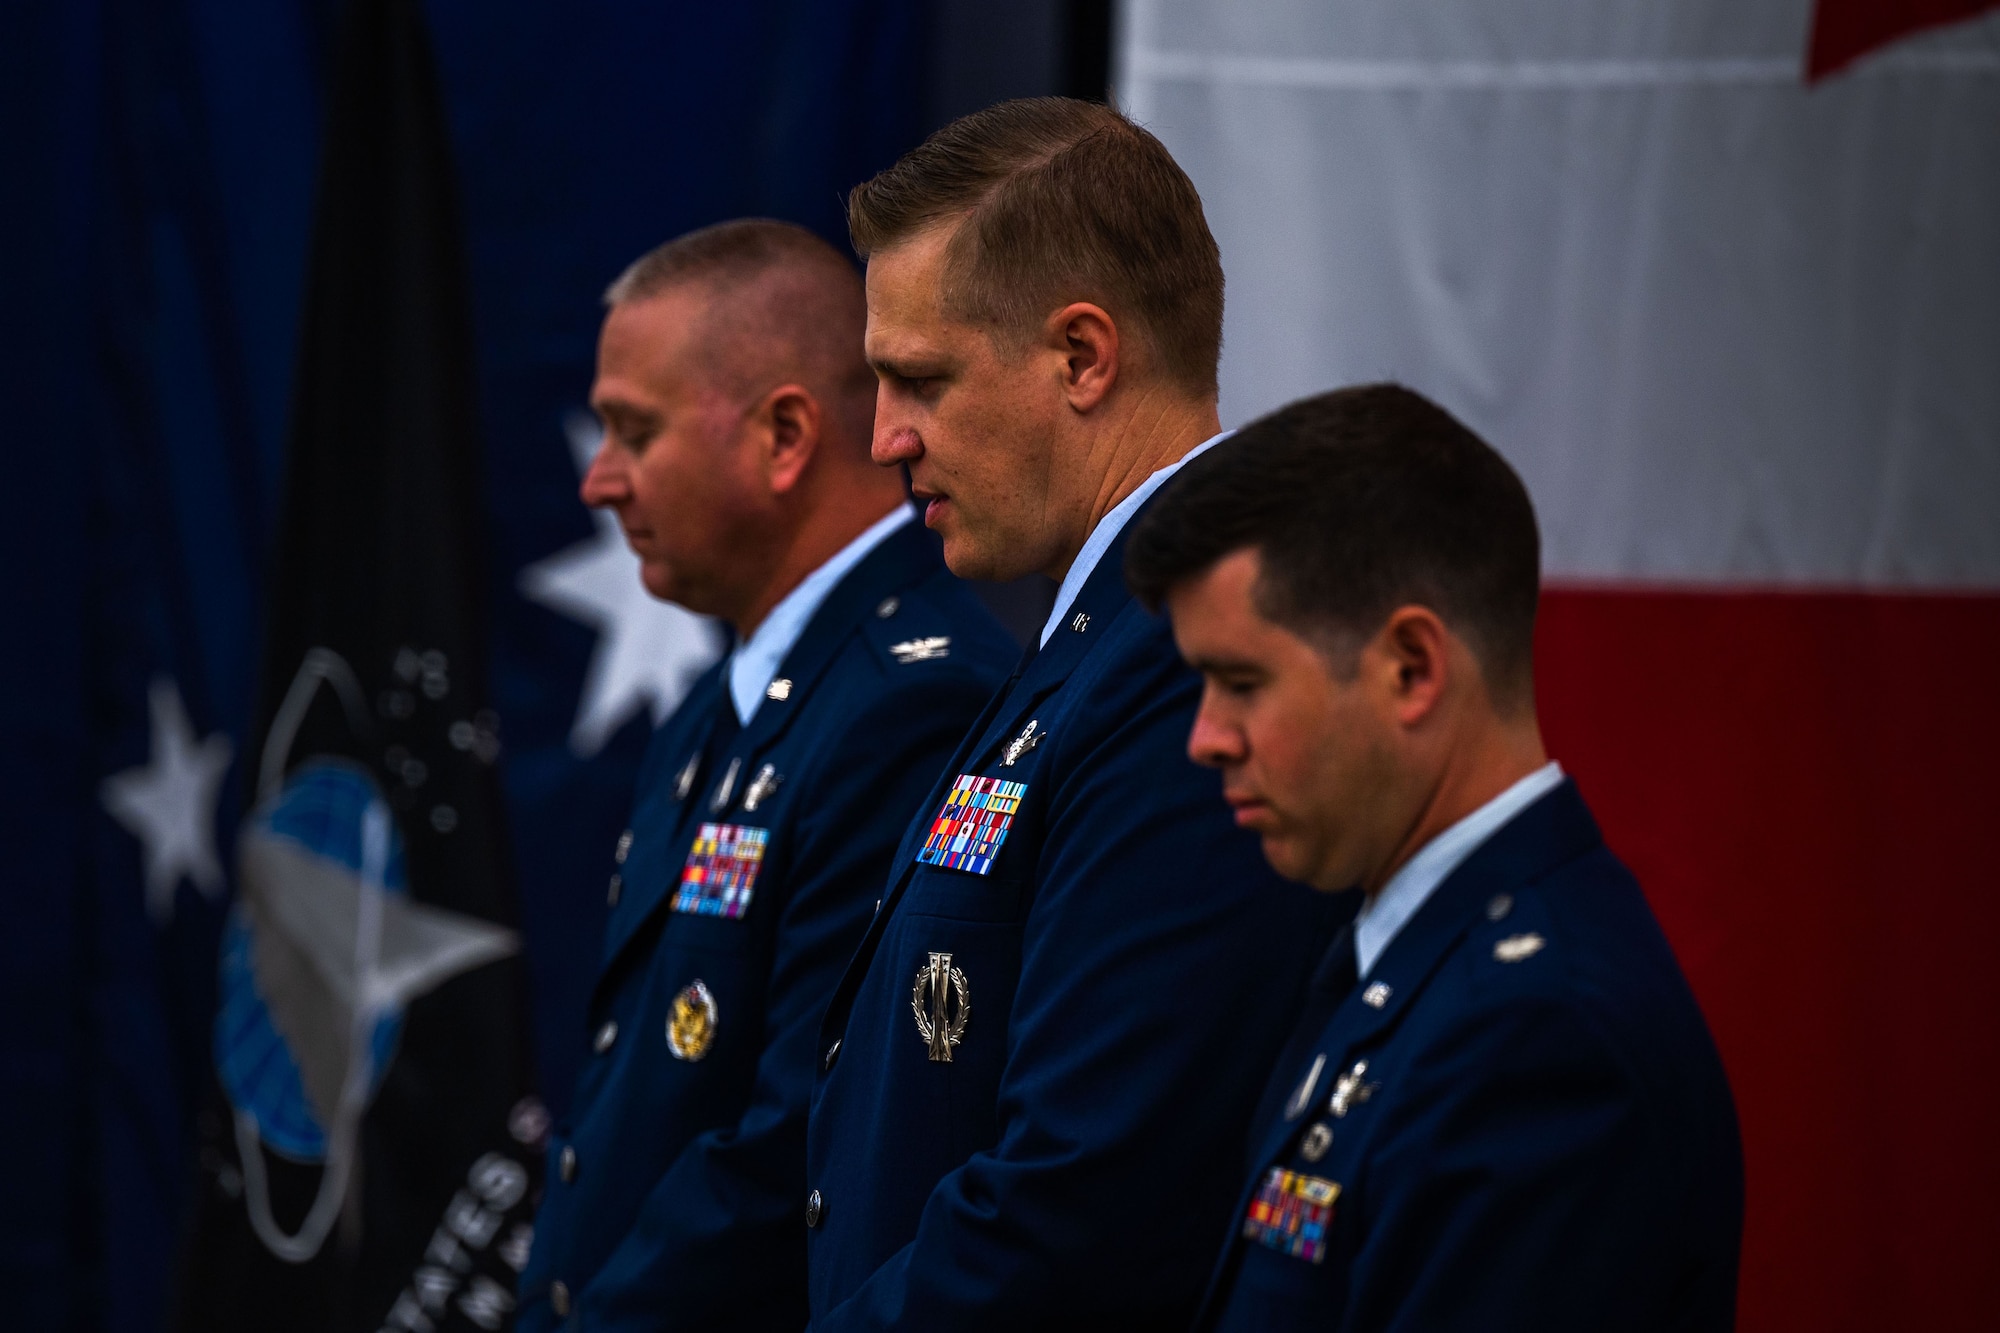 U.S. Space Force Col. Marc A. Brock, Space Delta 2 commander, left, Lt. Col. Matthew J. Lintker, outgoing 18th Space Defense Squadron (18 SDS) commander, middle, and Lt. Col. Jordan O.E. Mugg, incoming 18 SDS commander, stand during the beginning of the 18 SDS Change of Command ceremony at Vandenberg Space Force Base, Calif., June 21, 2023. (U.S. Space Force photo by Tech. Sgt. Luke Kitterman)